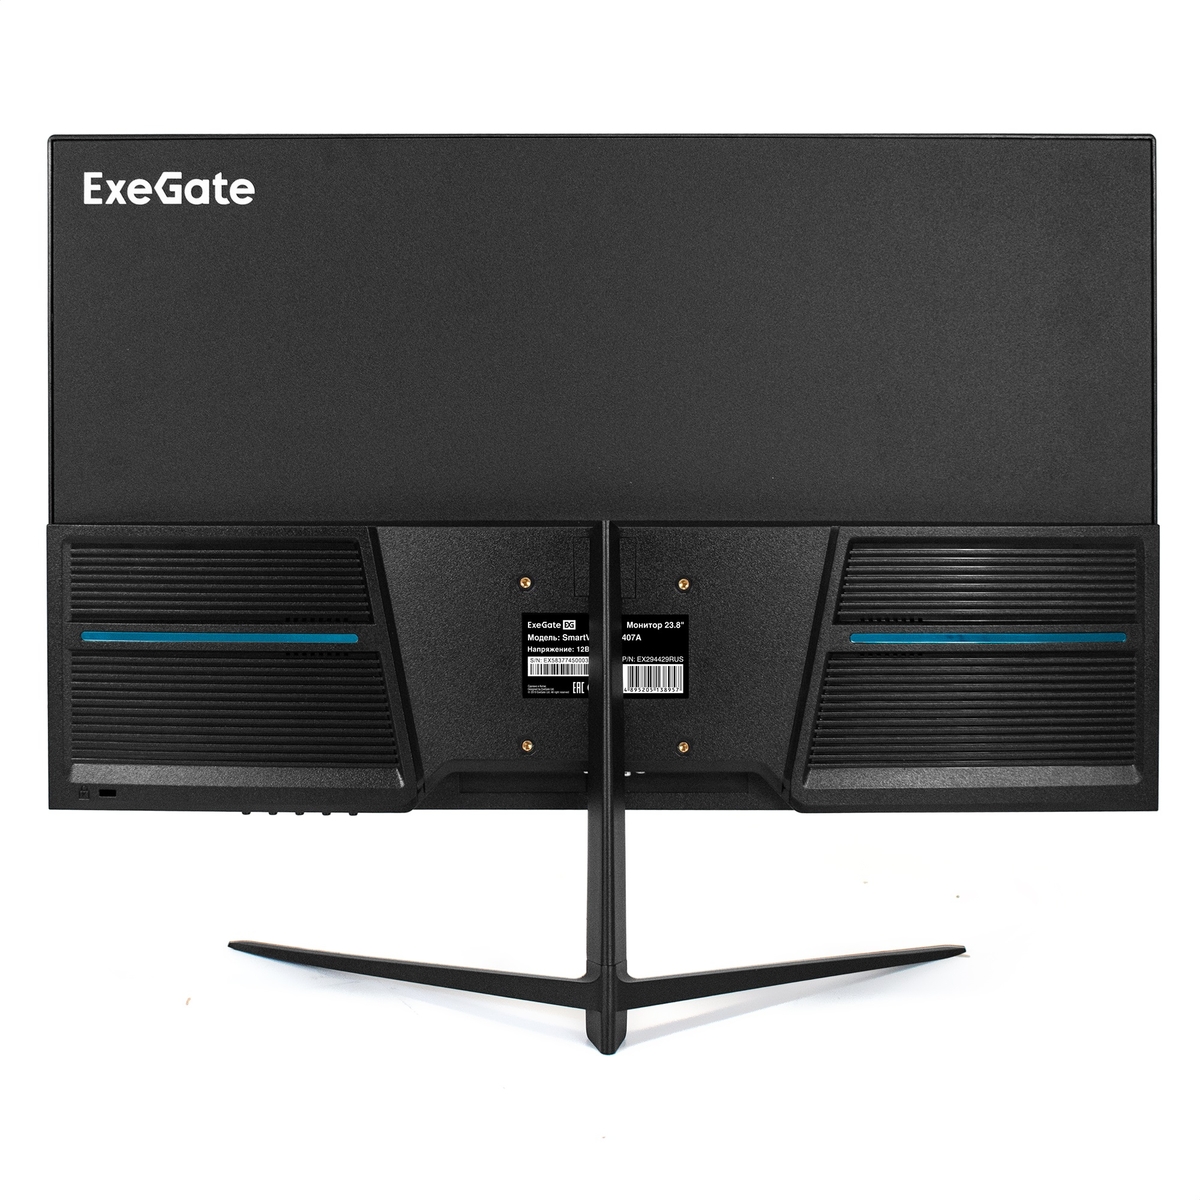 Monitor 23.8" ExeGate SmartView ES2407A